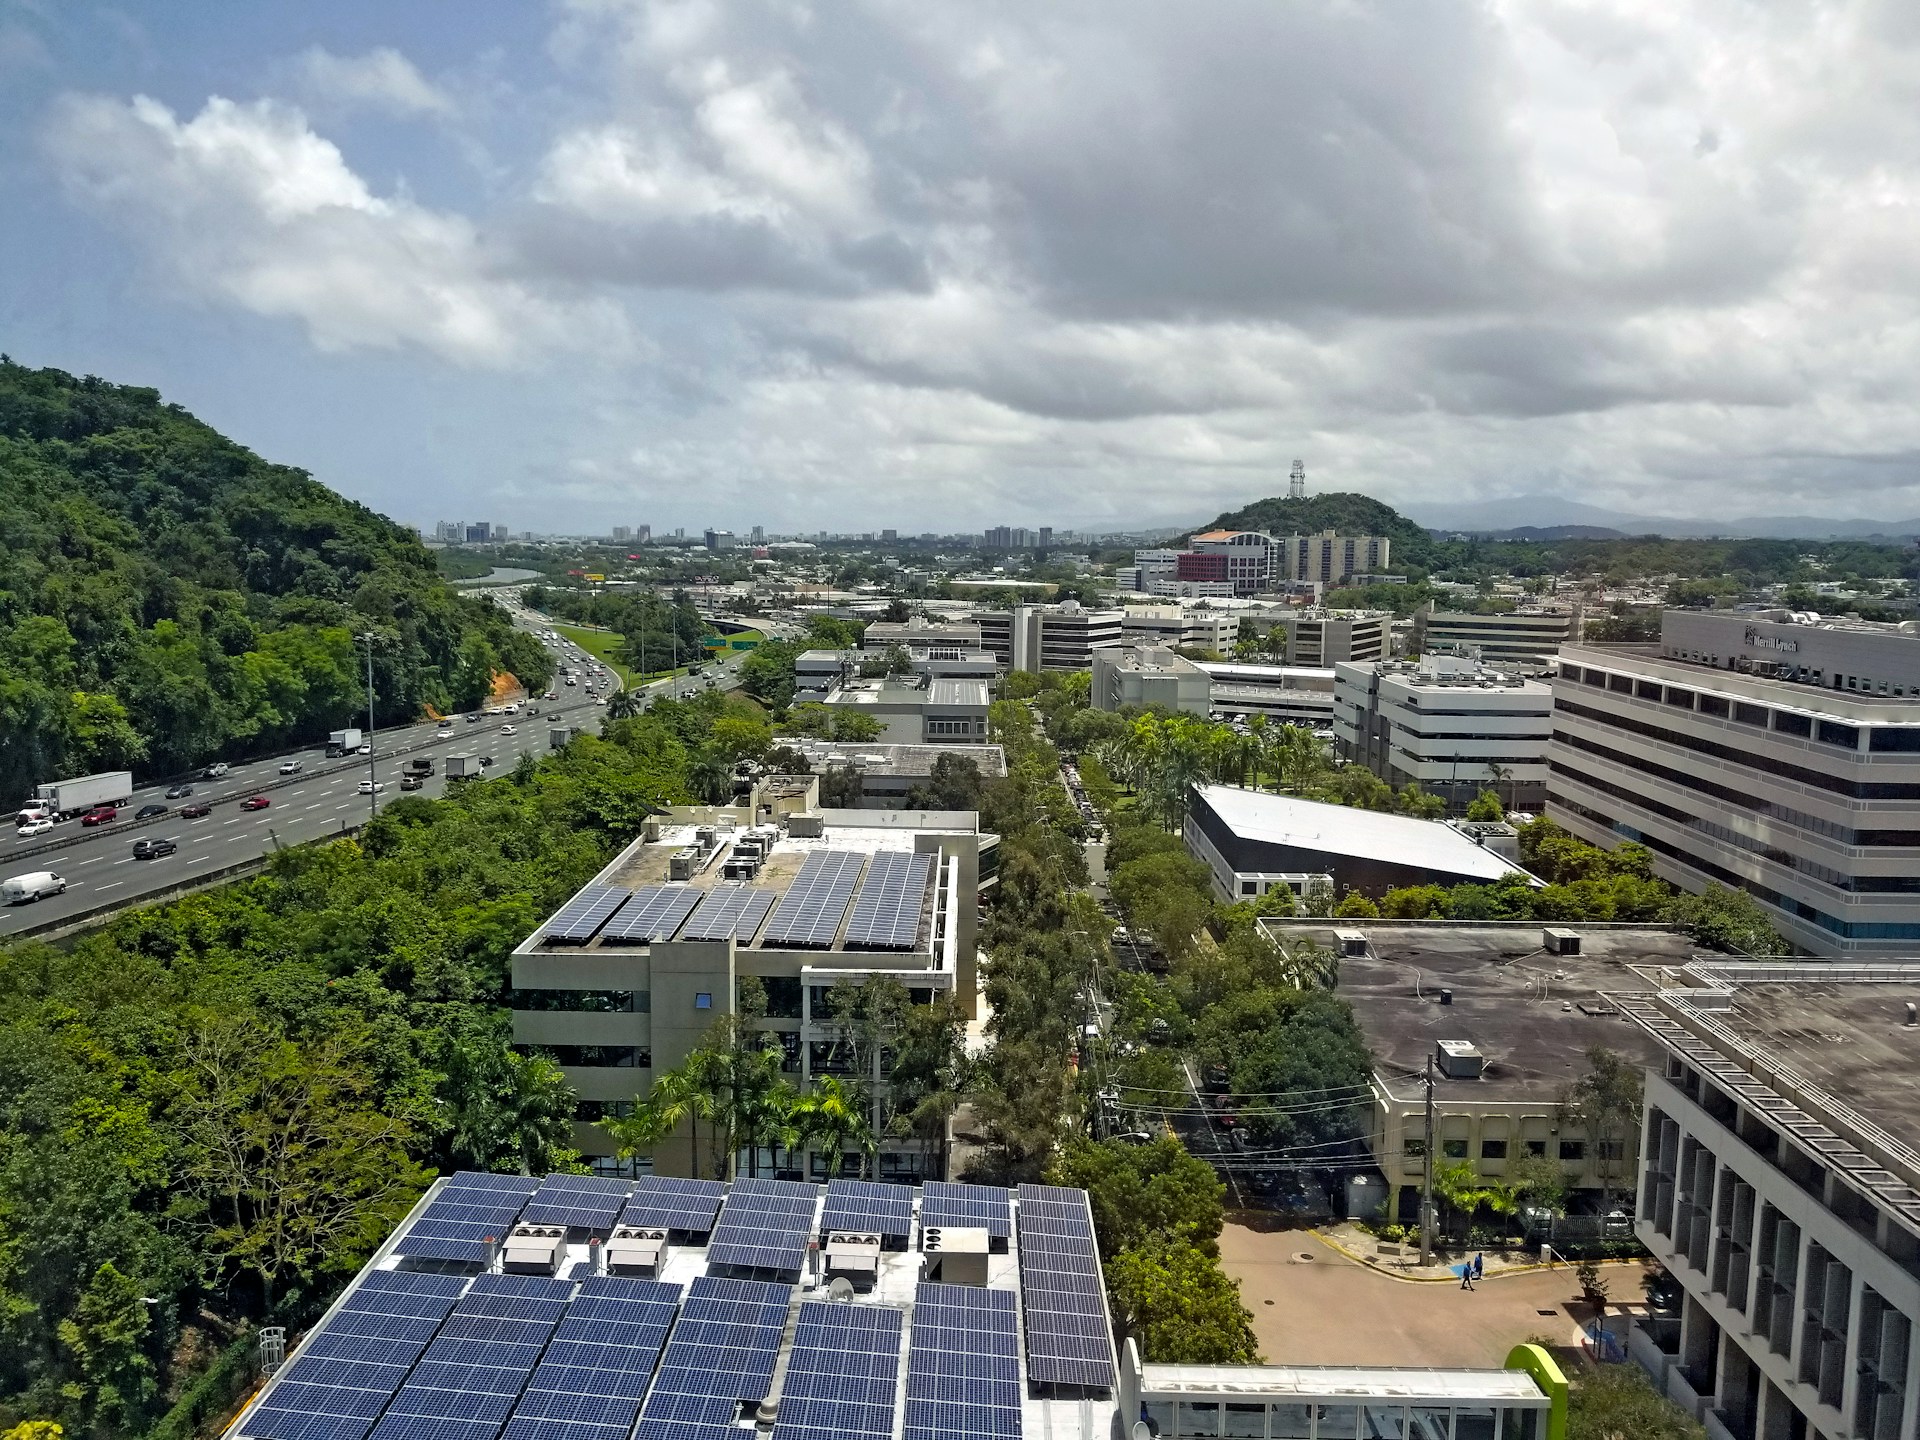 an aerial view of a city with solar panels